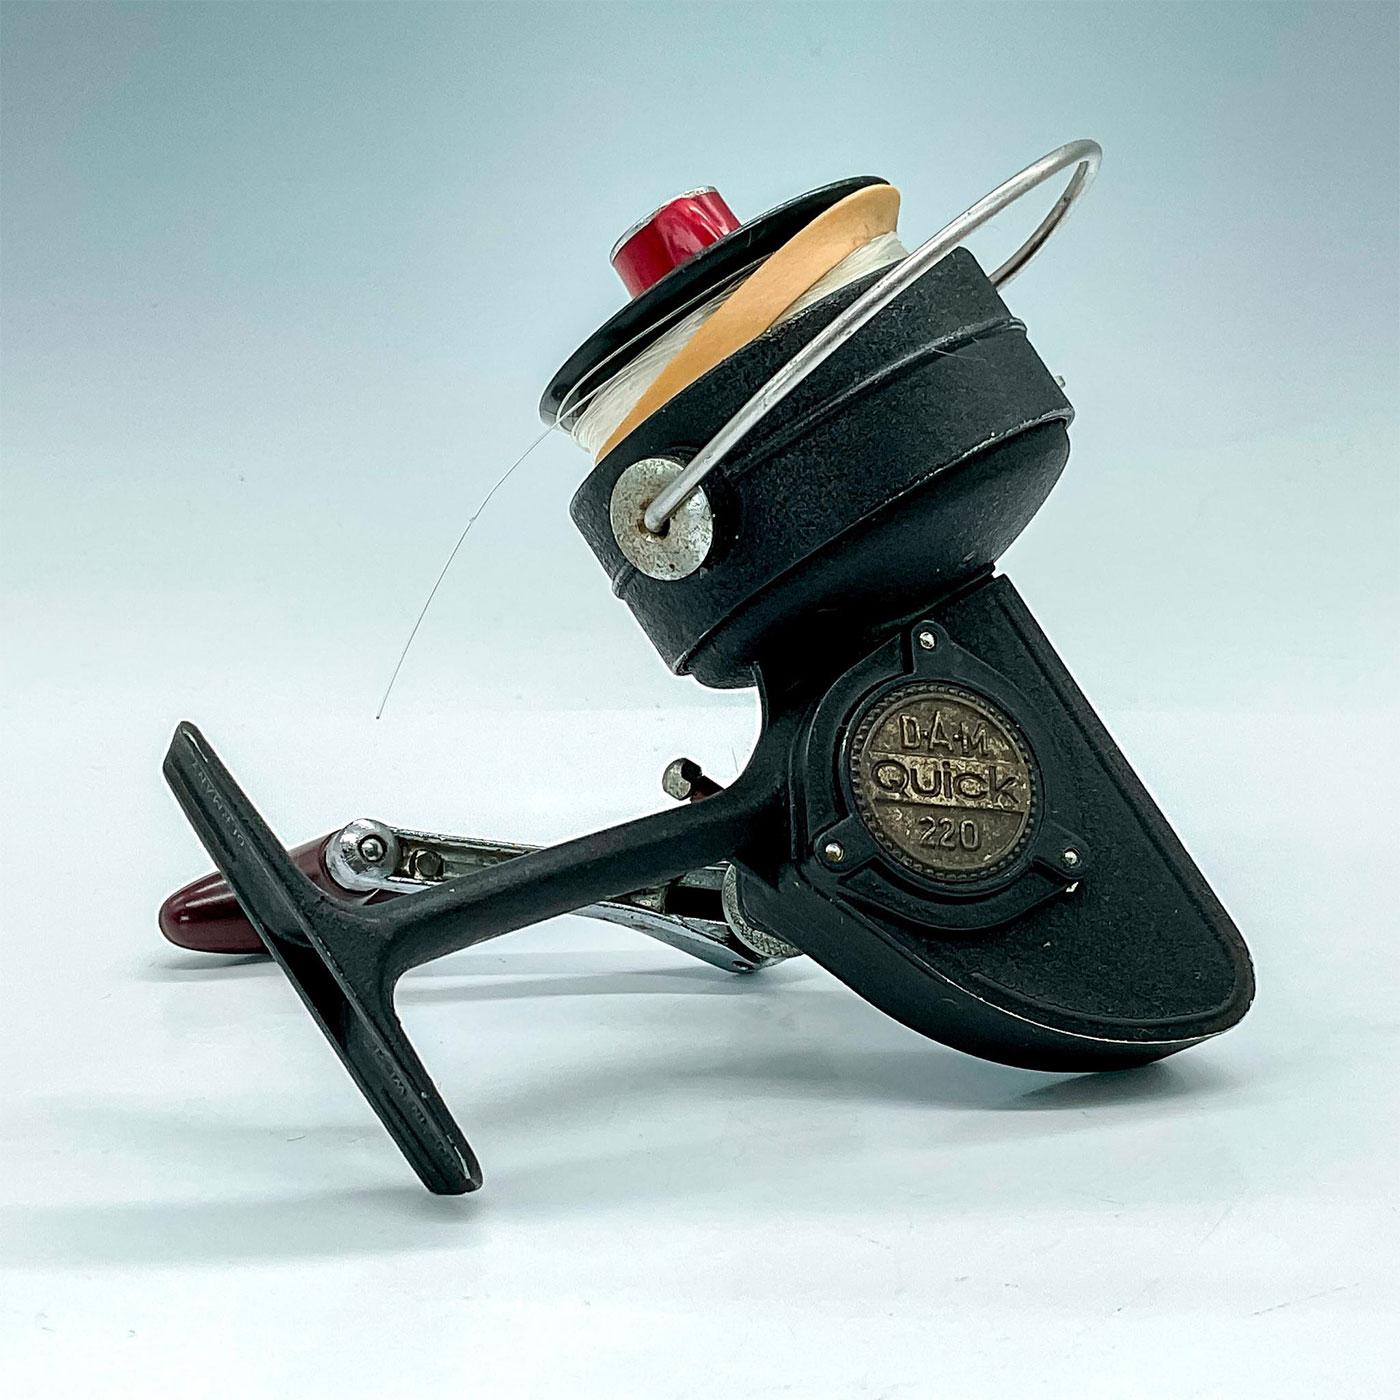 Vintage D.A.M. Quick 220 Spinning Reel